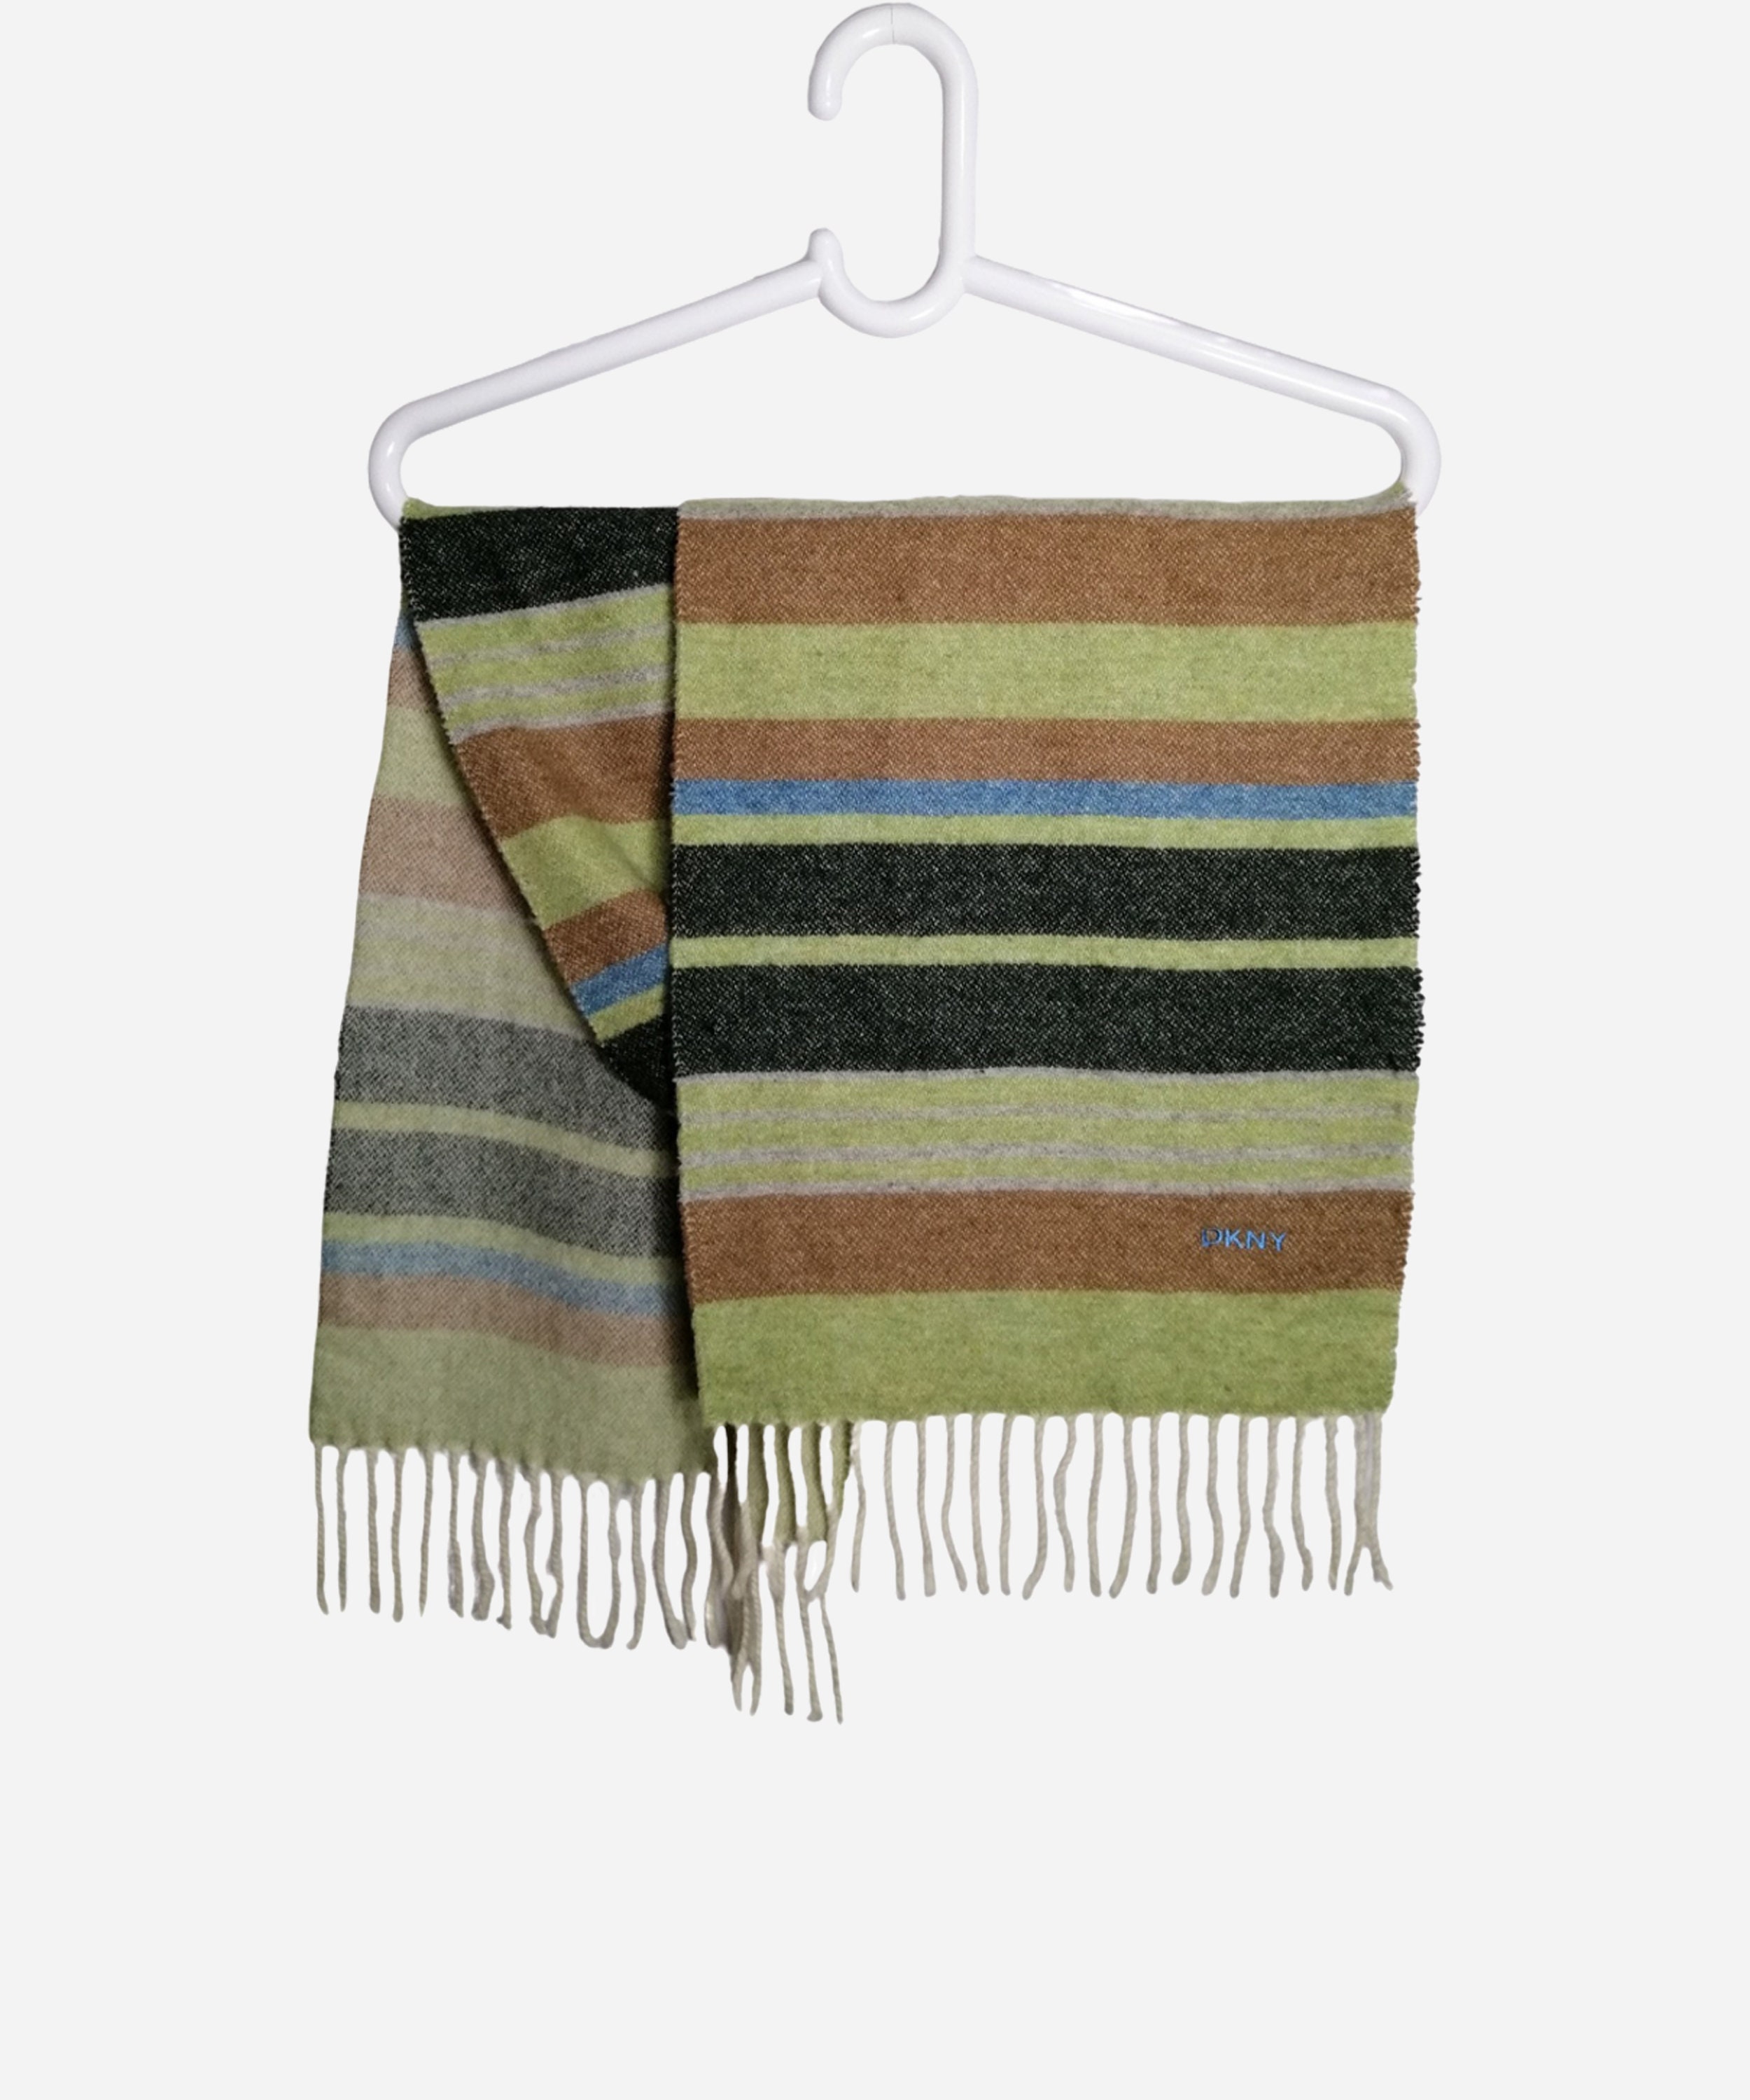 Dkny Wool Blend Scarf With Tassels Multicolor Striped Unisex Donna Karan New York Vintage Made in Italy